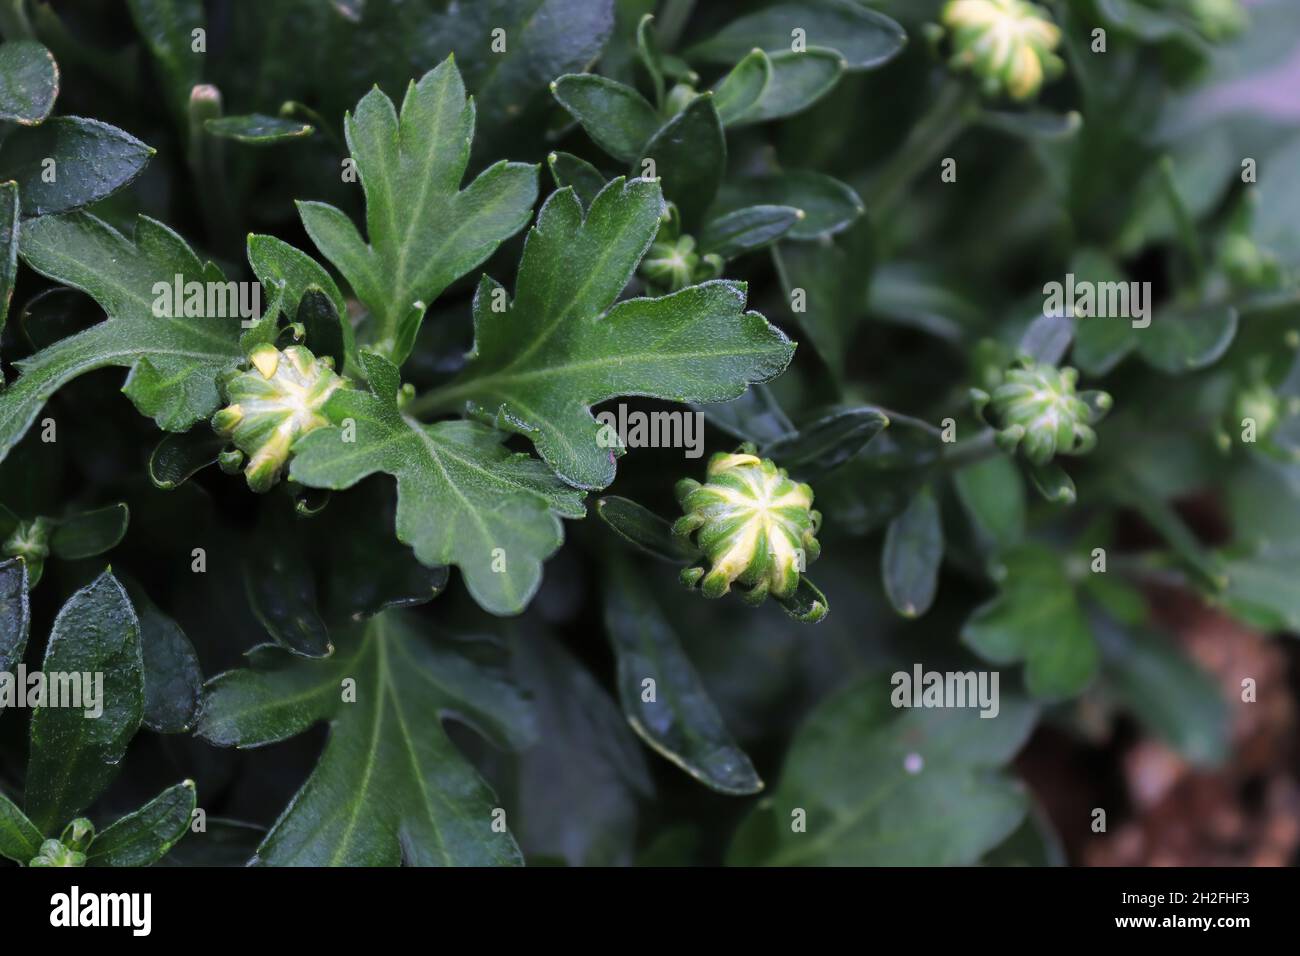 View of budding garden mums between leaves Stock Photo